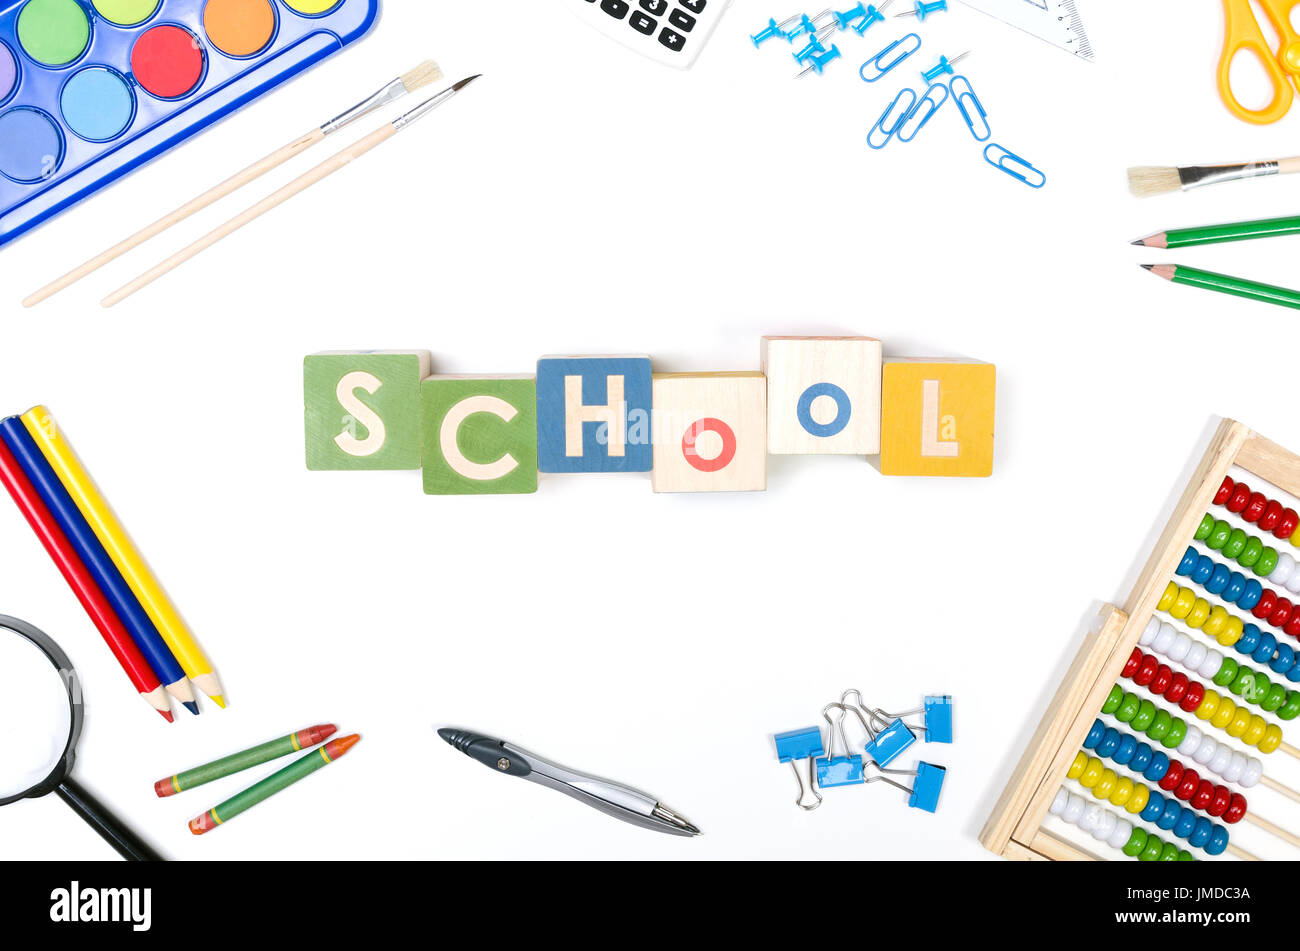 School supplies isolated on white background. Back to school concept Stock Photo